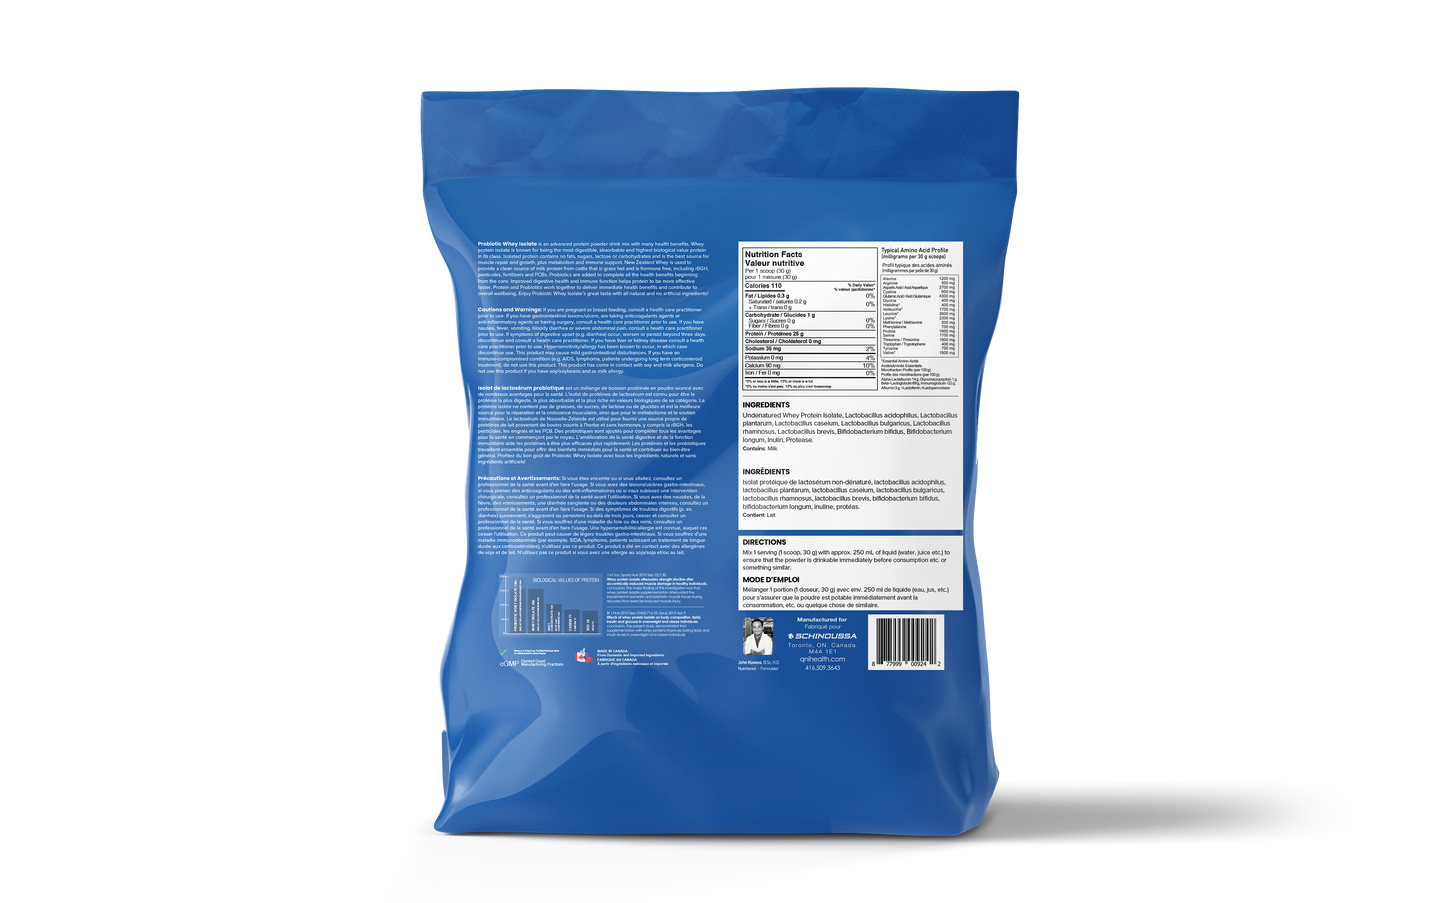 NEW ZEALAND PROBIOTIC WHEY ISO NATURAL FLAVOUR